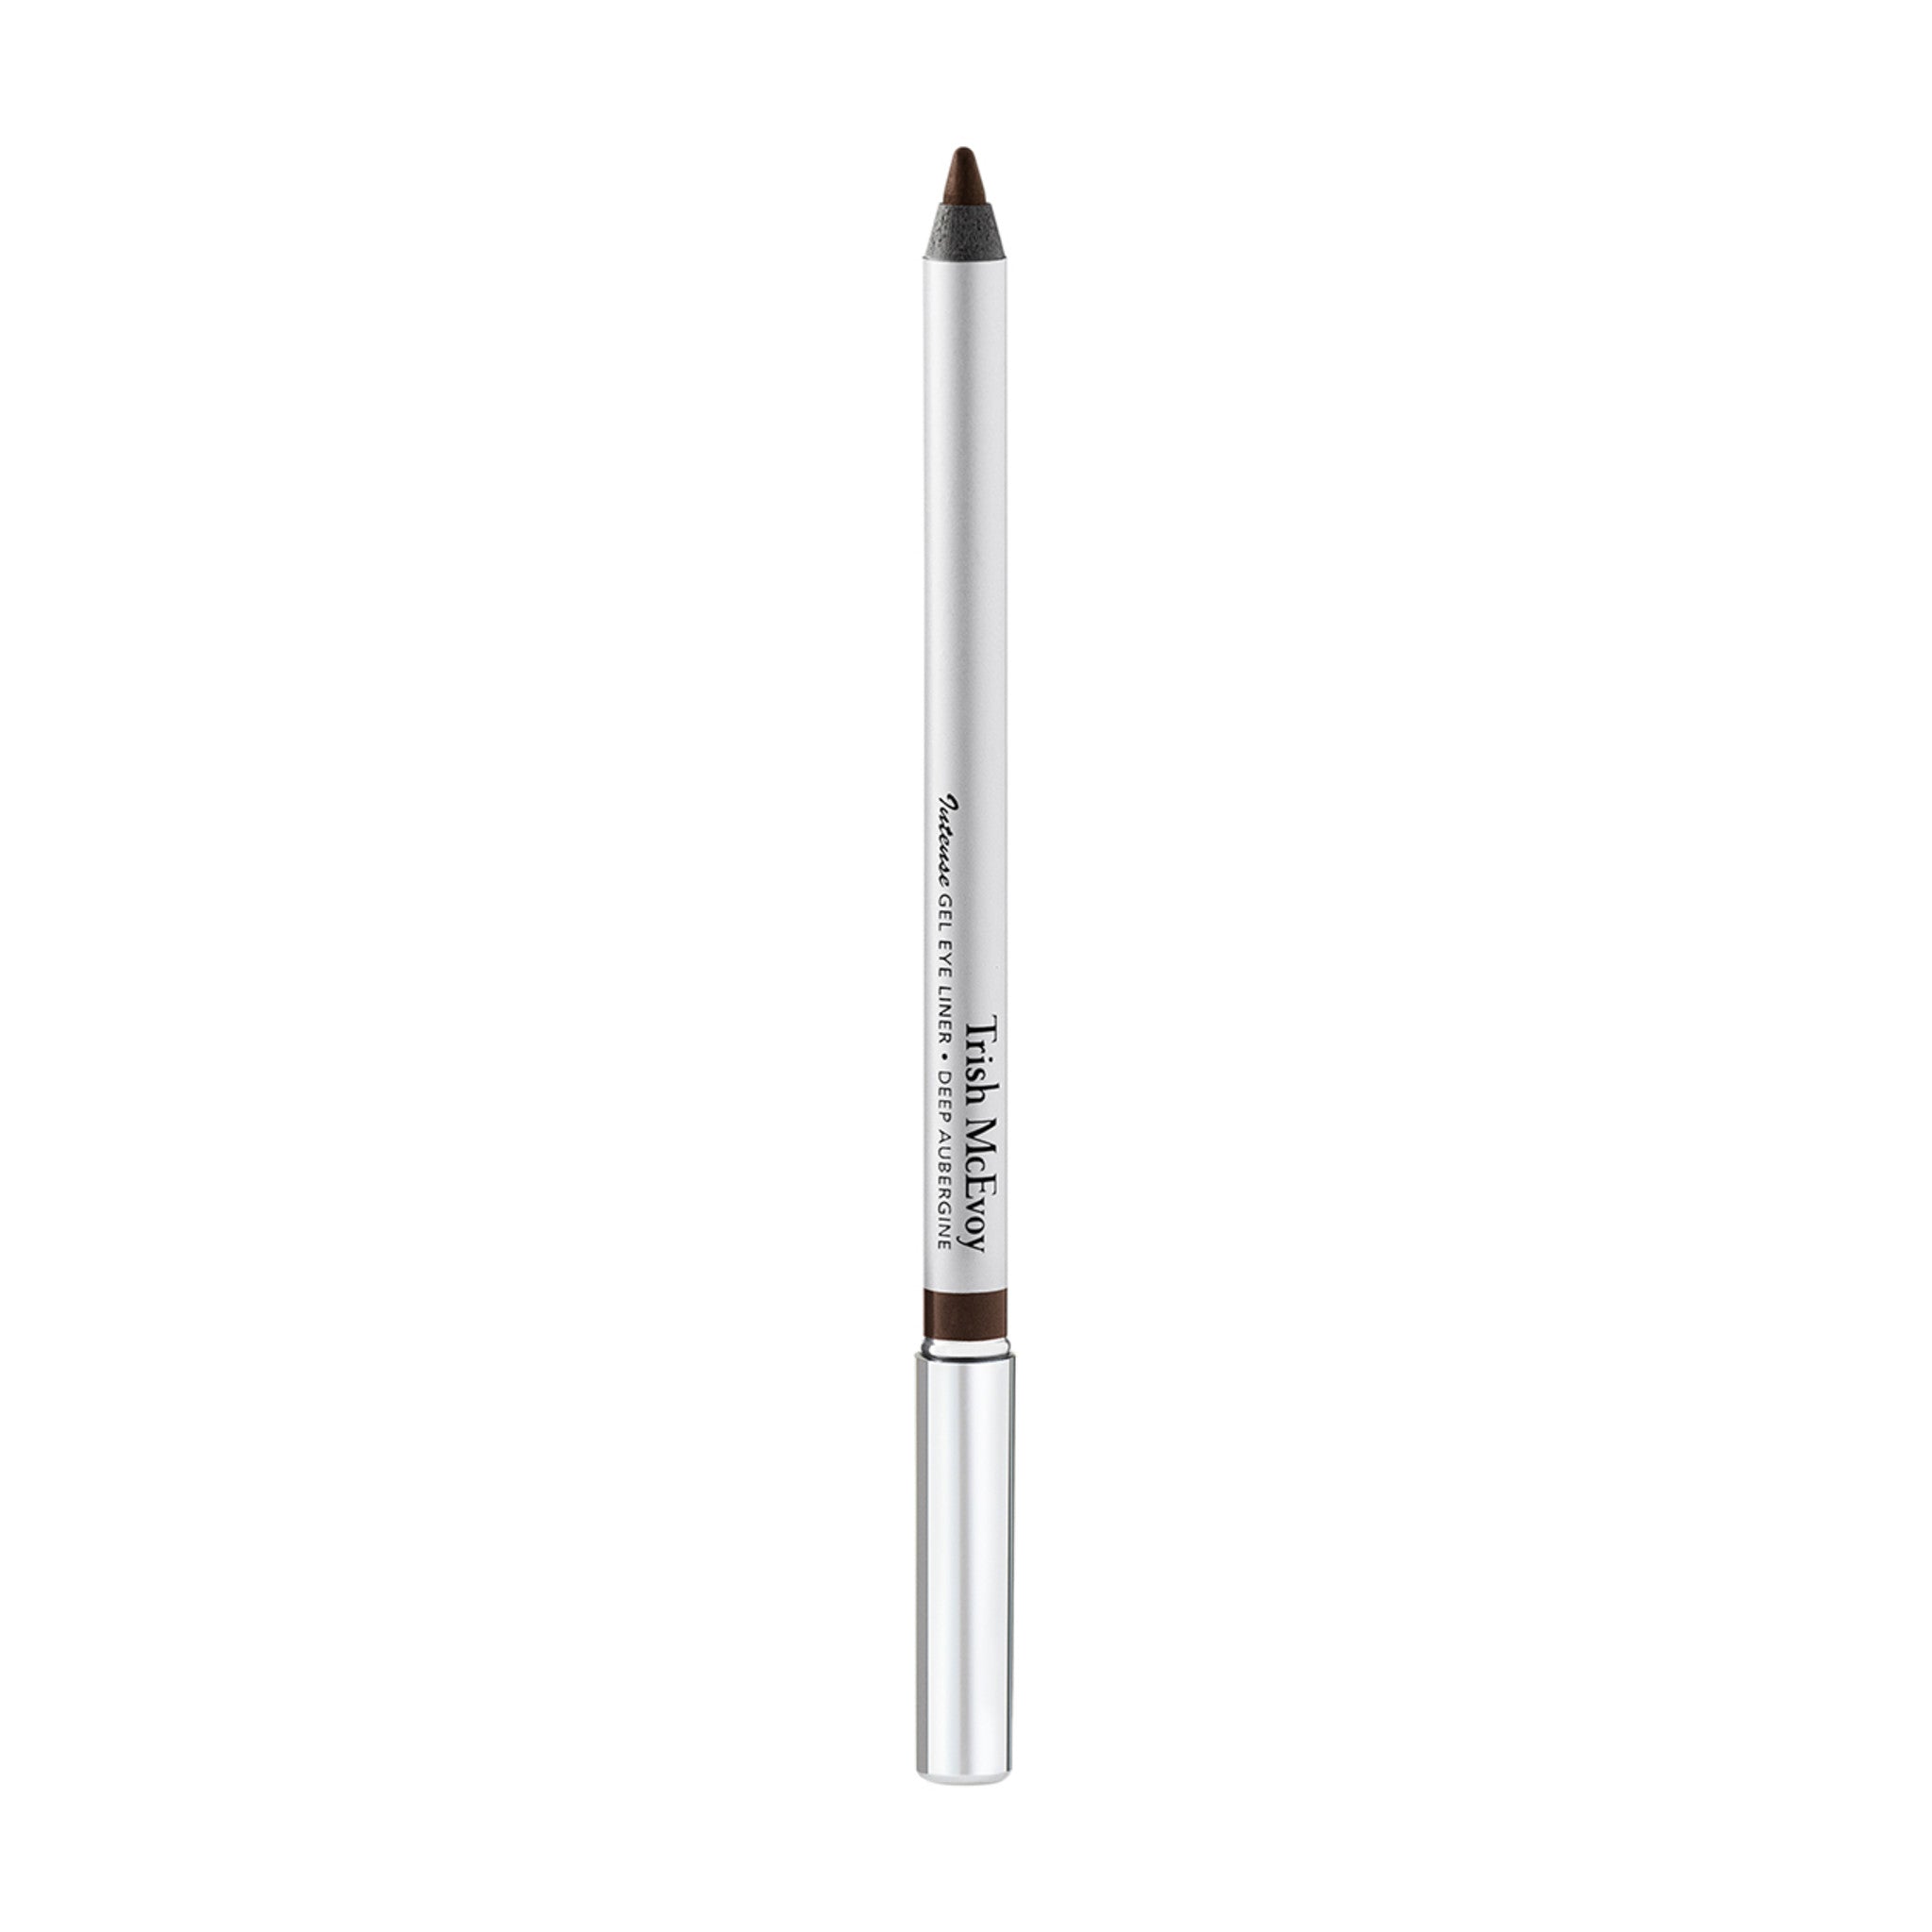 Trish McEvoy Intense Gel Eye Liner Color/Shade variant: Deep Aubergine main image. This product is in the color brown